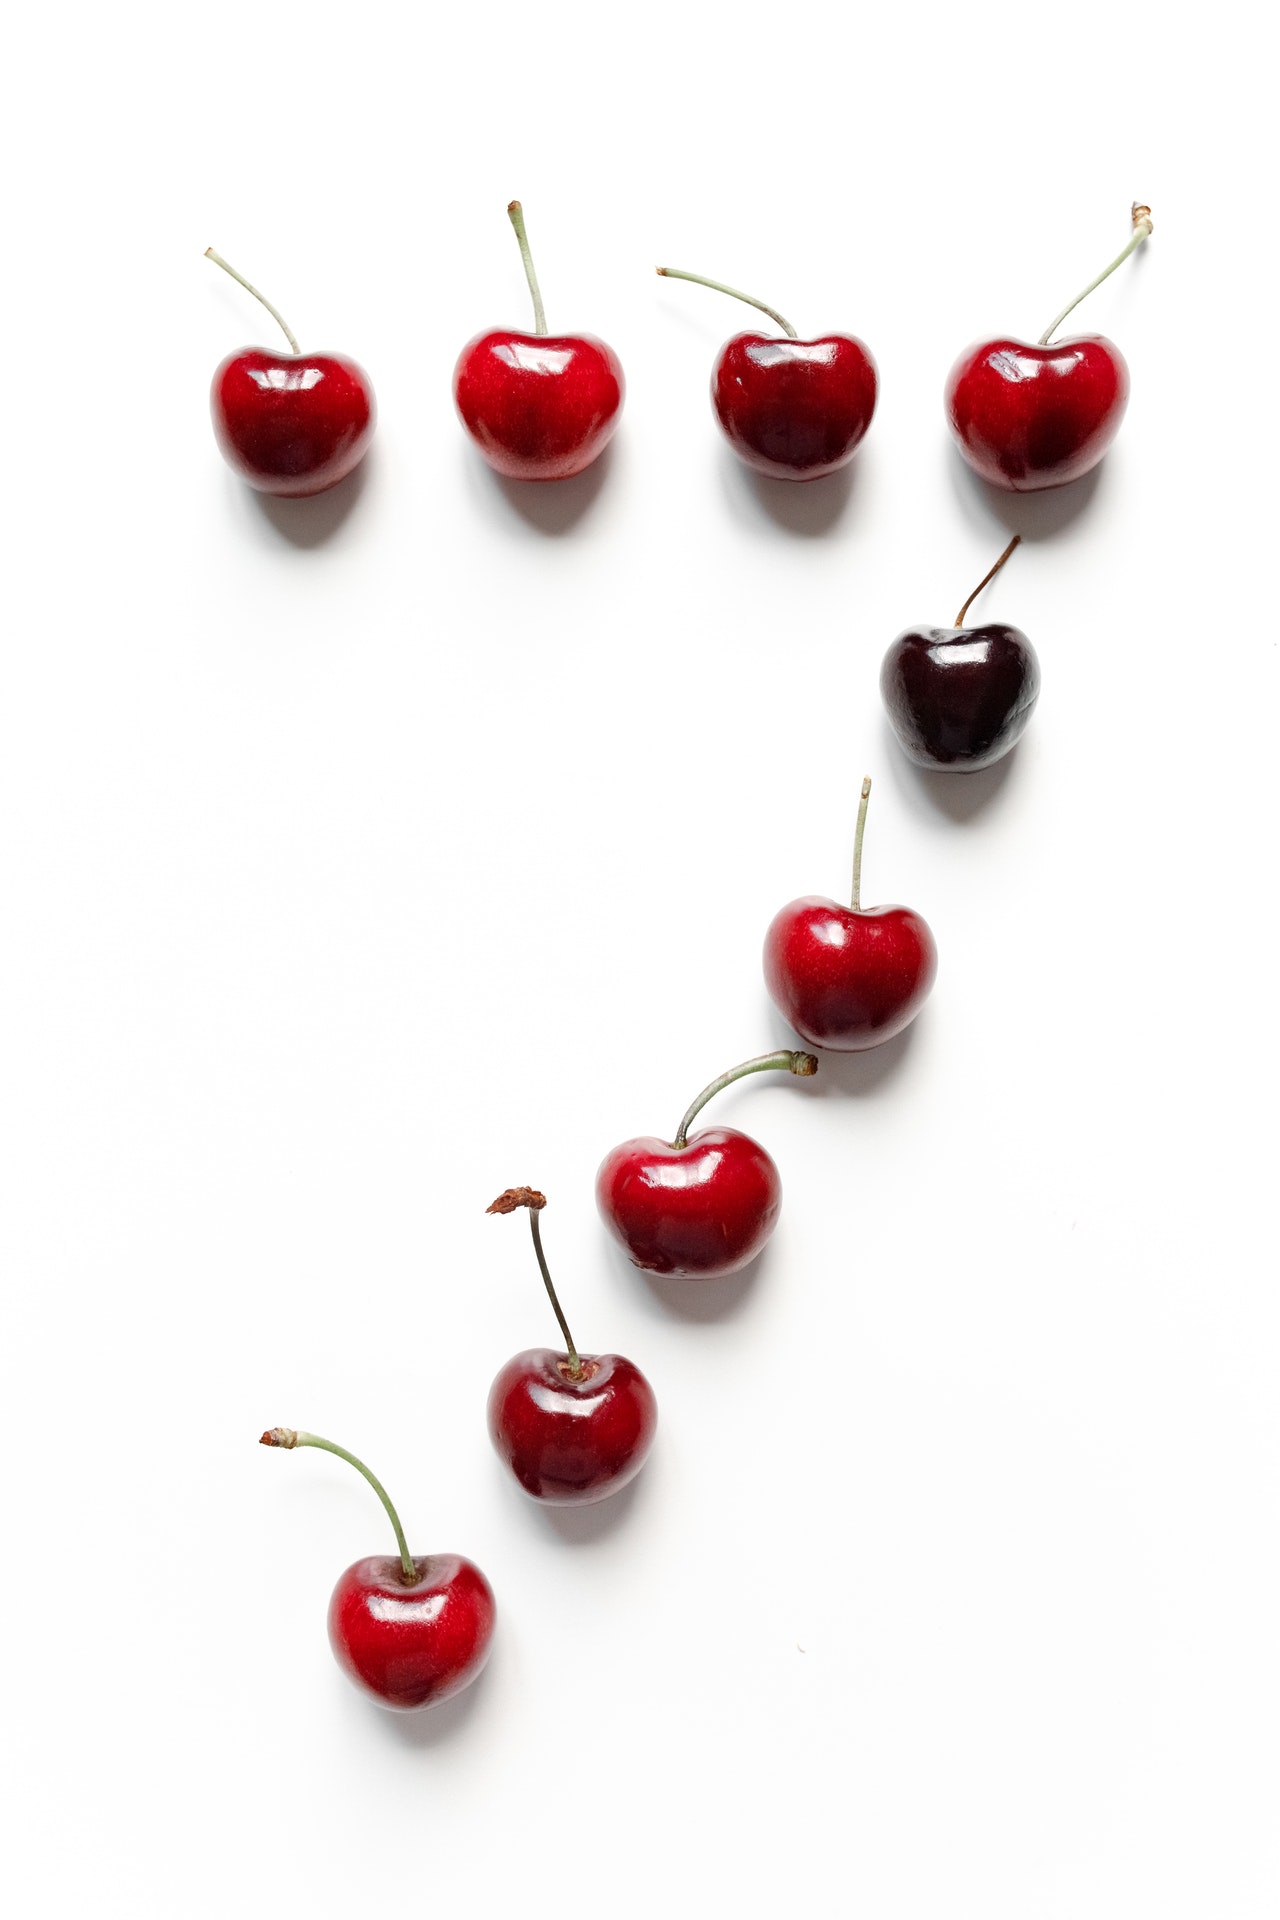 Red Cherries on White Surface